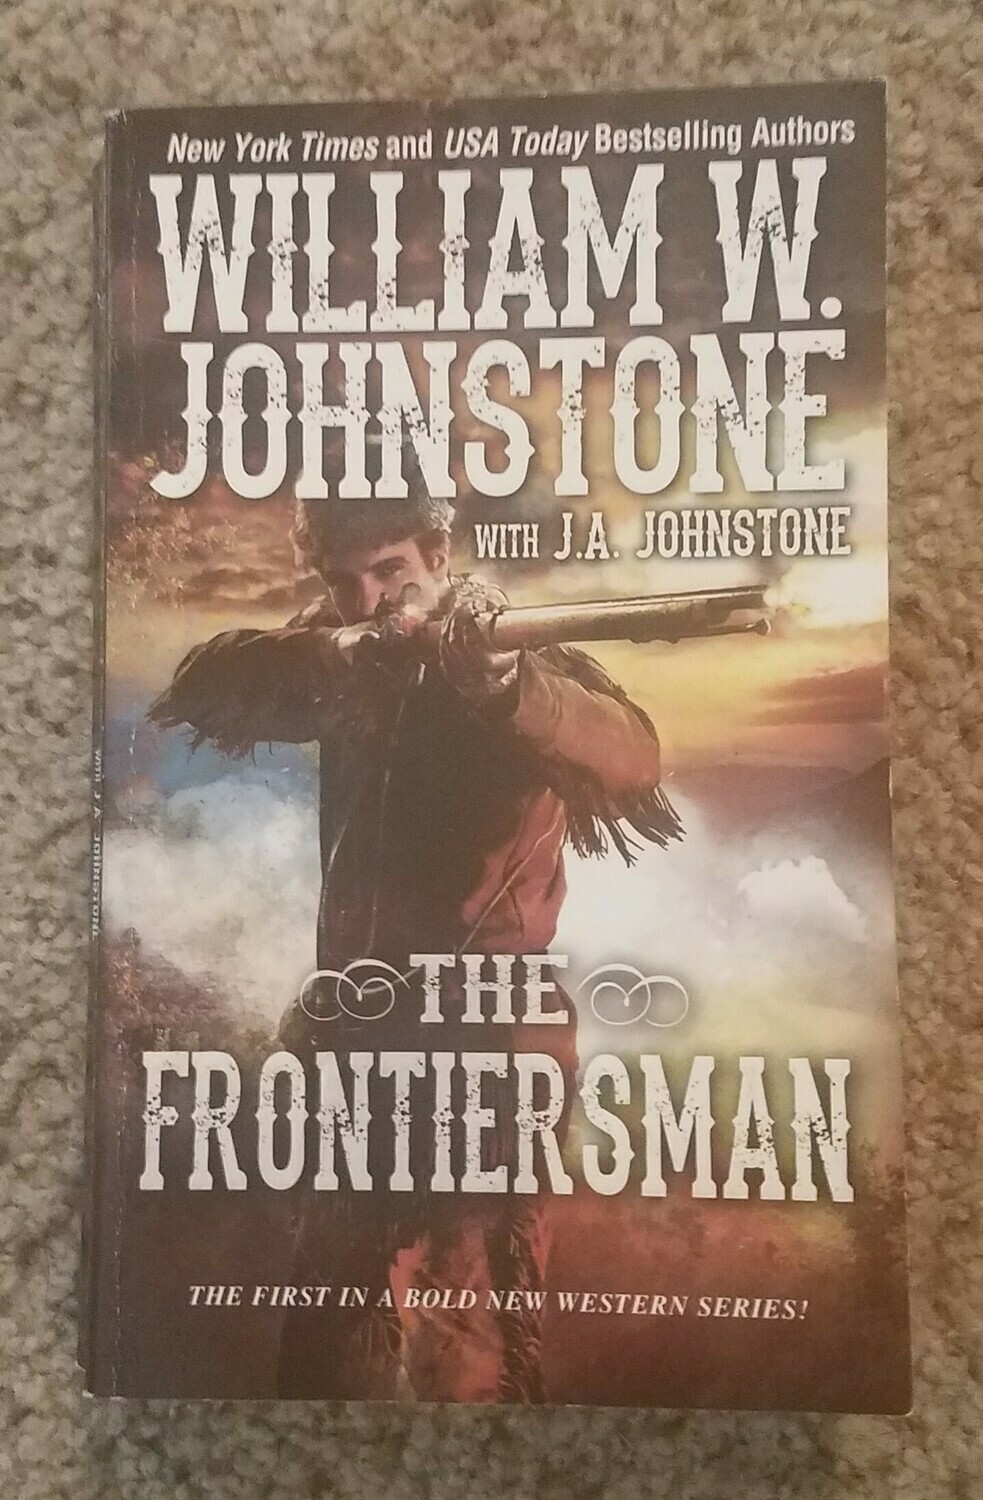 The Frontiersman by William W. Johnstone with J.A. Johnstone